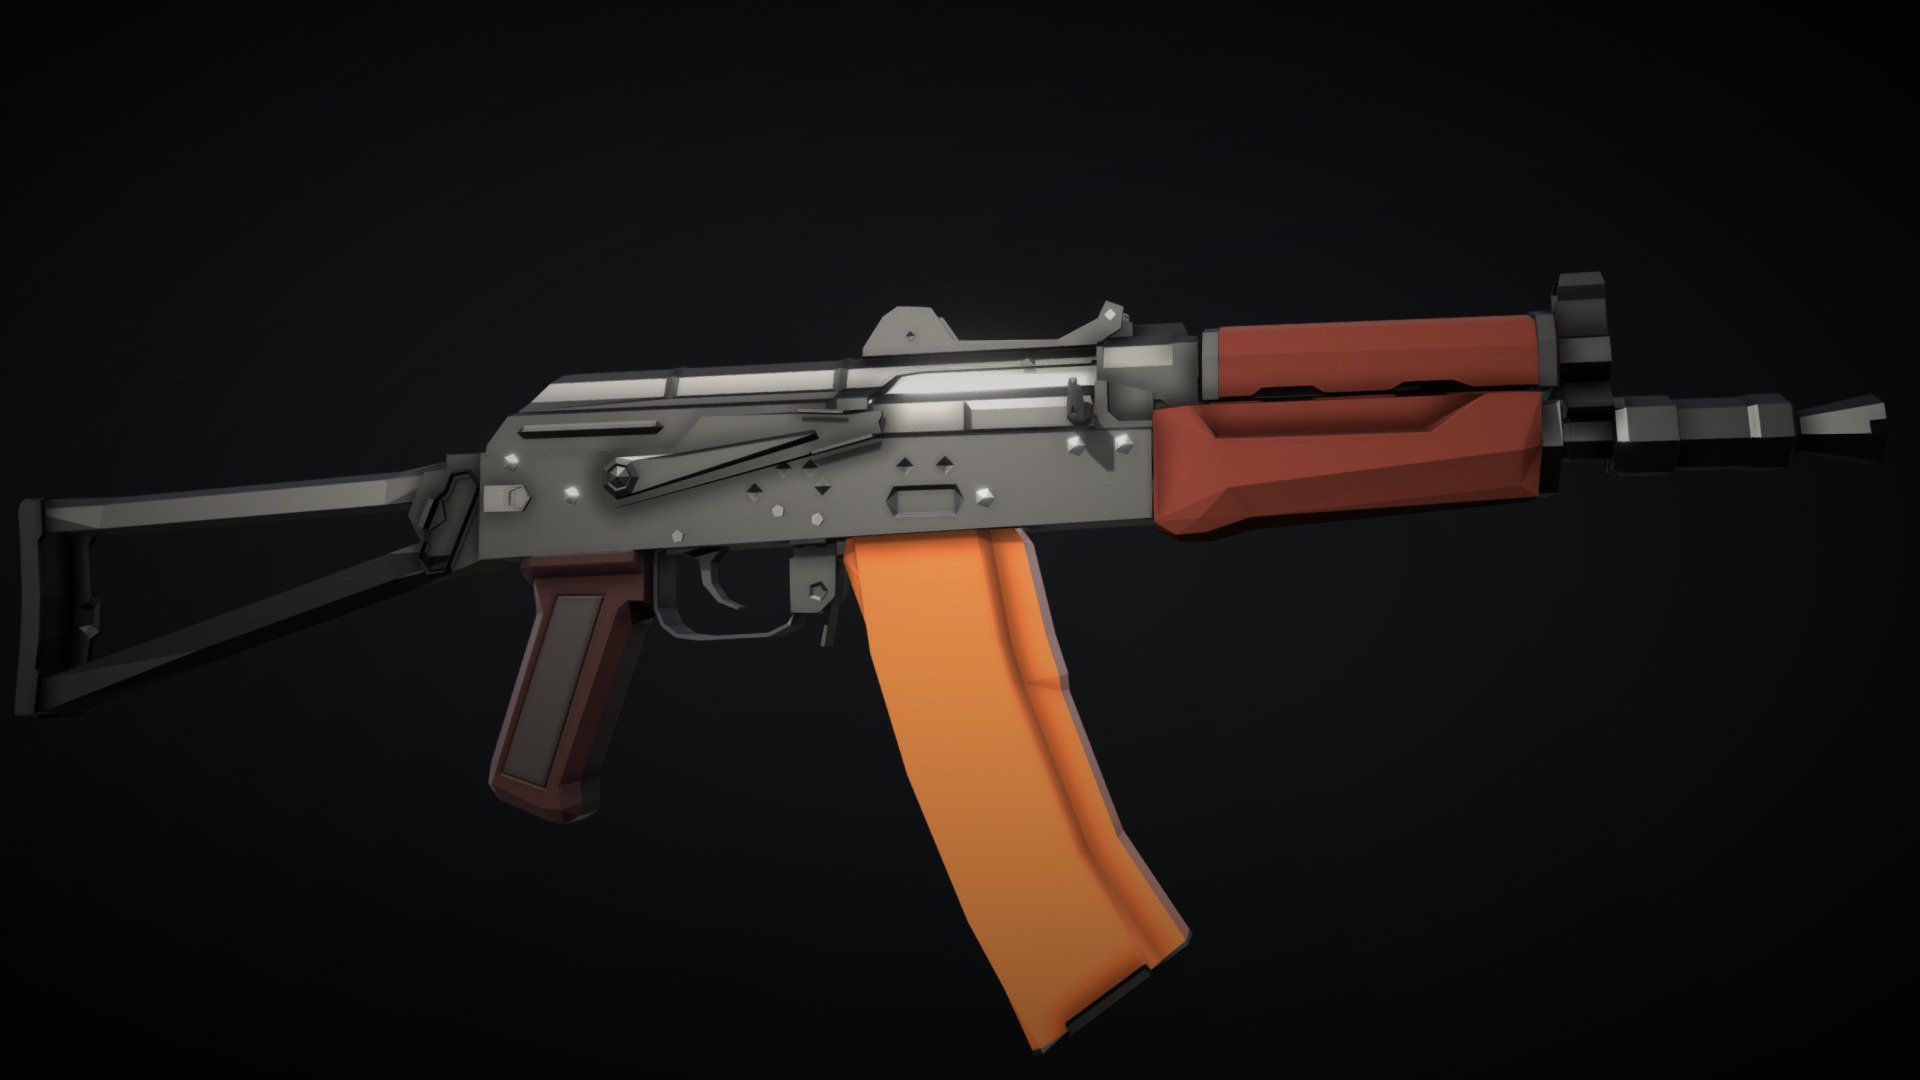 Low-Poly model of an AKS-74UN, a carbine/PDW variant of the AK-74, with a folding metal stock and an attachment rail for mounting optics 3d model